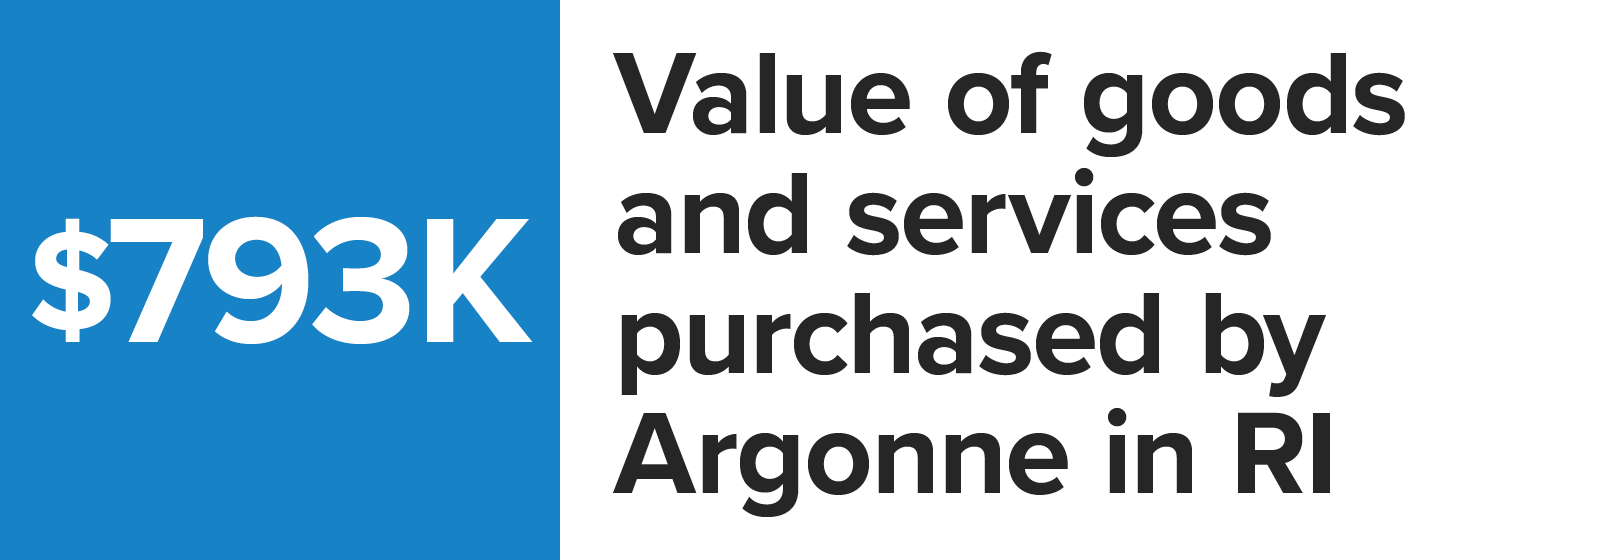 Number graphic value of goods and services purchased by Argonne in Rhode Island